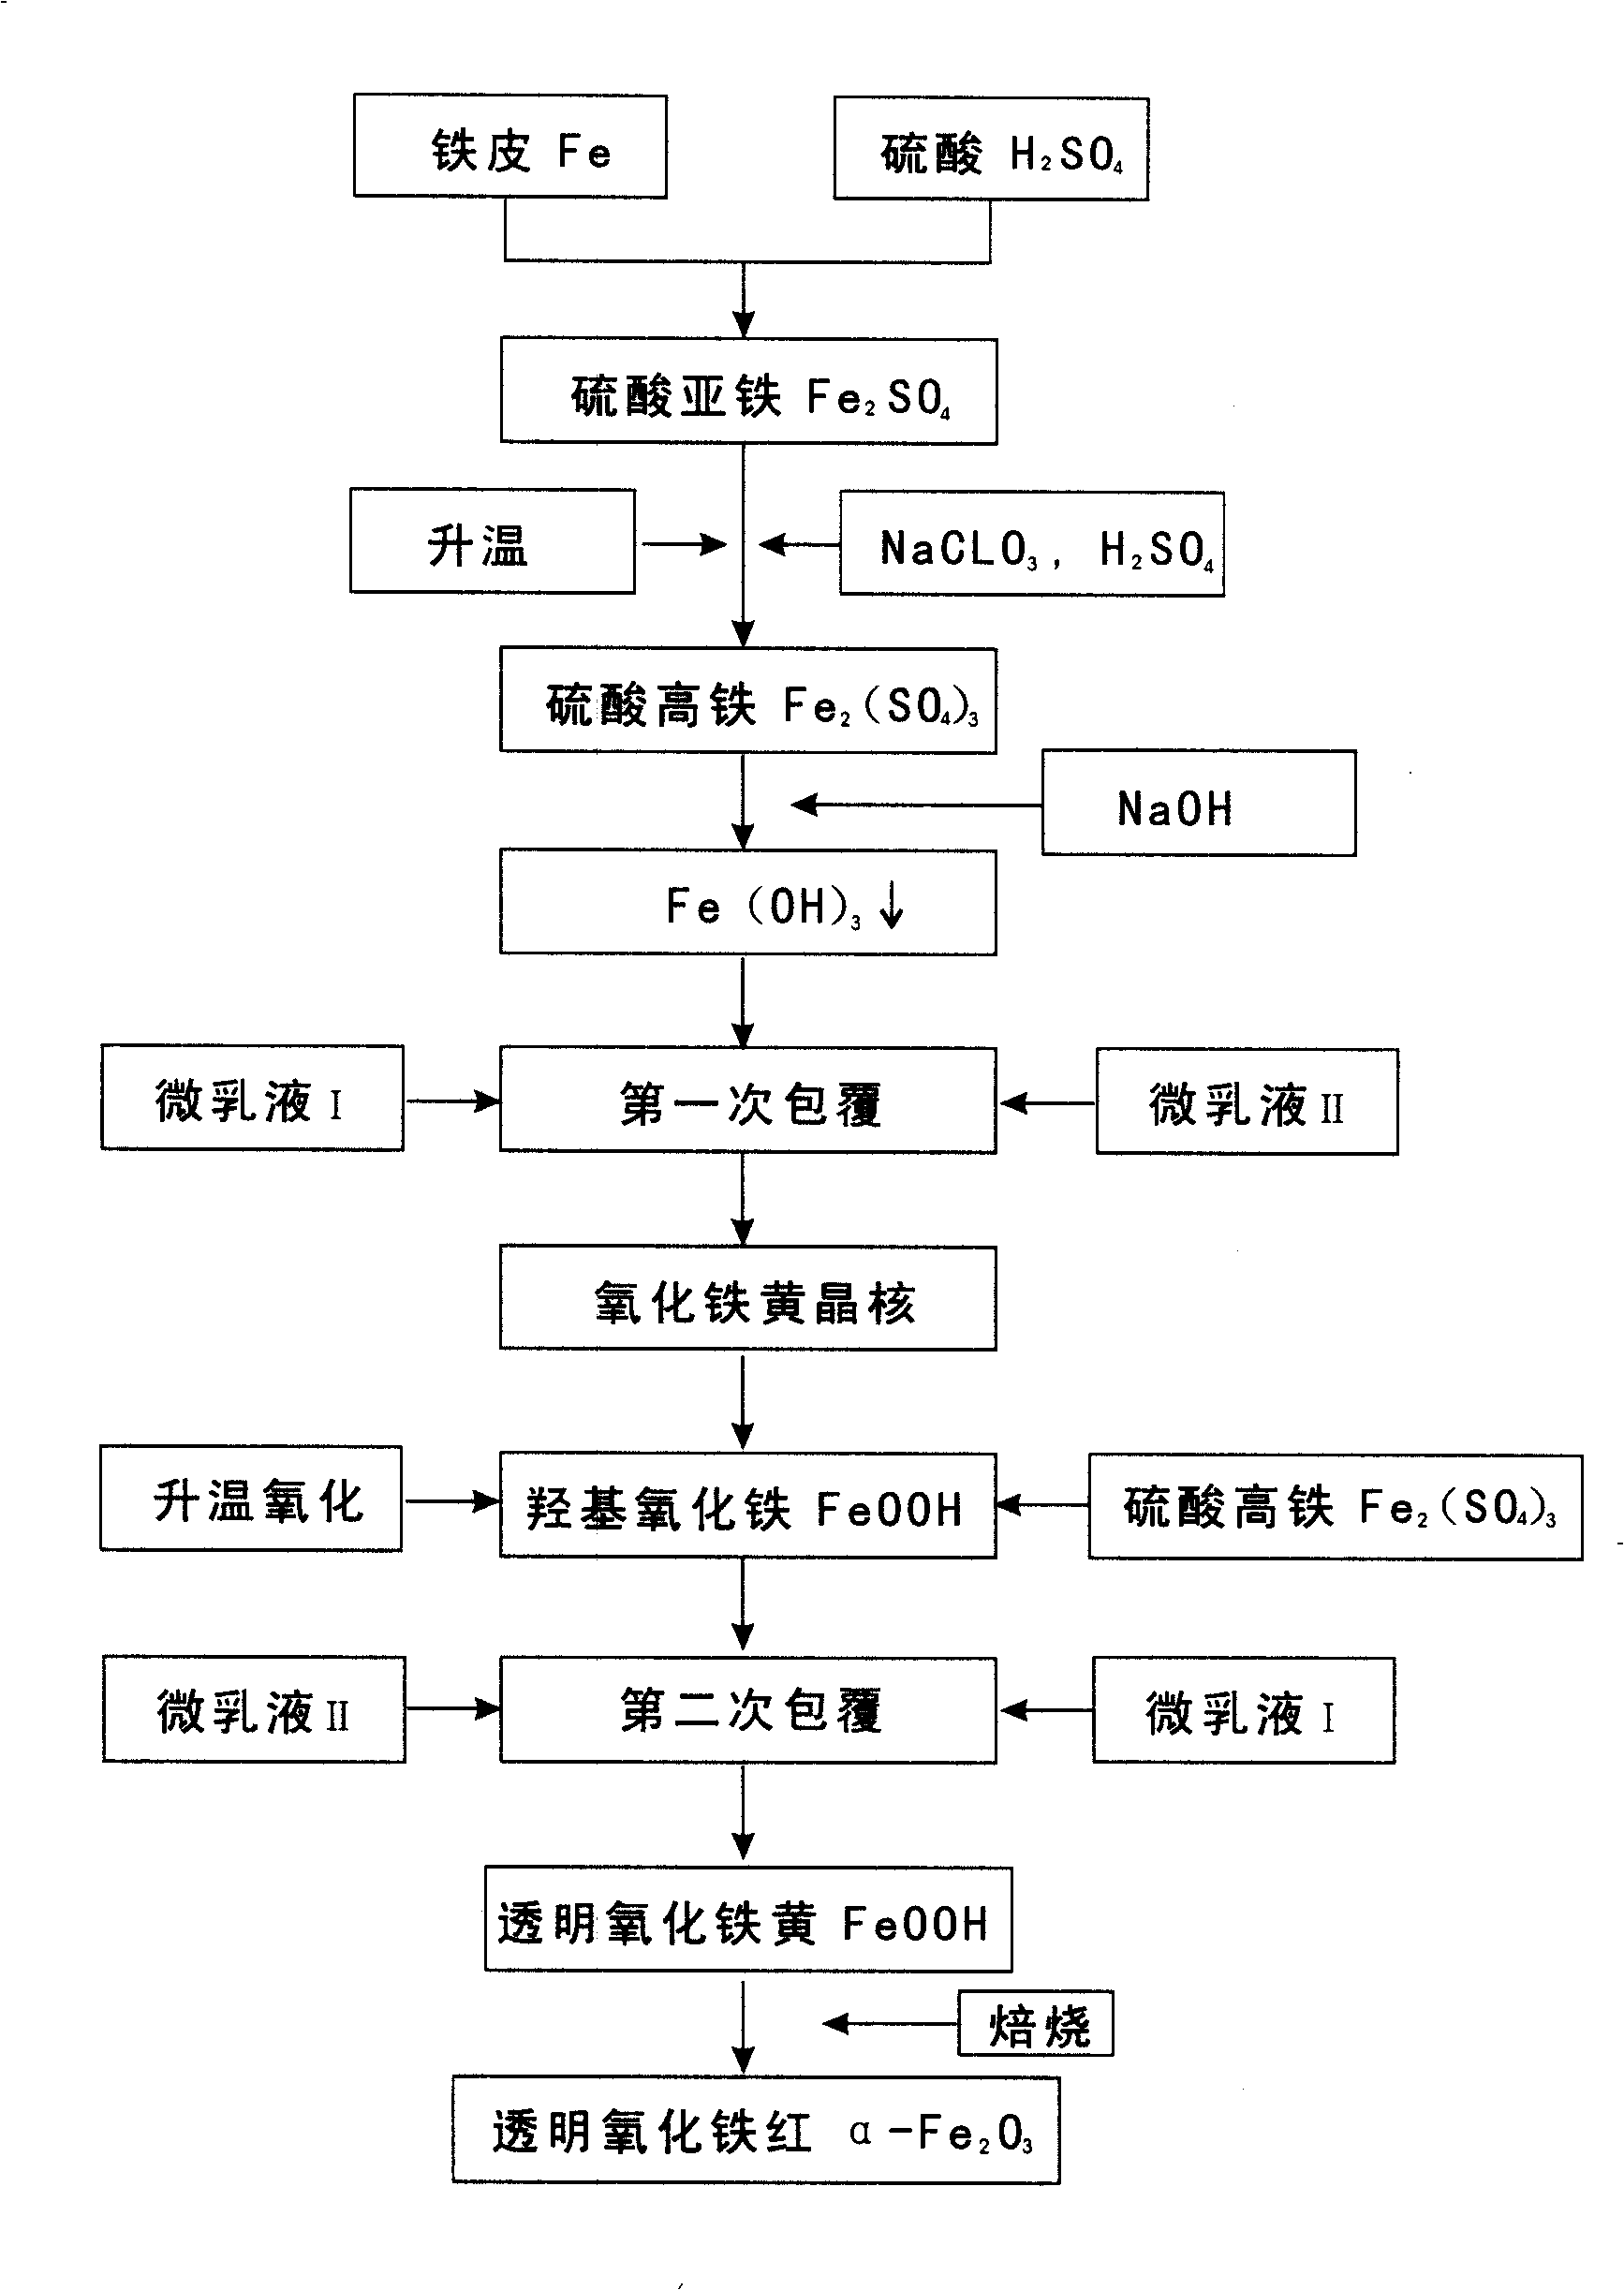 Method for preparing transparent iron oxide pigment with microemulsion method